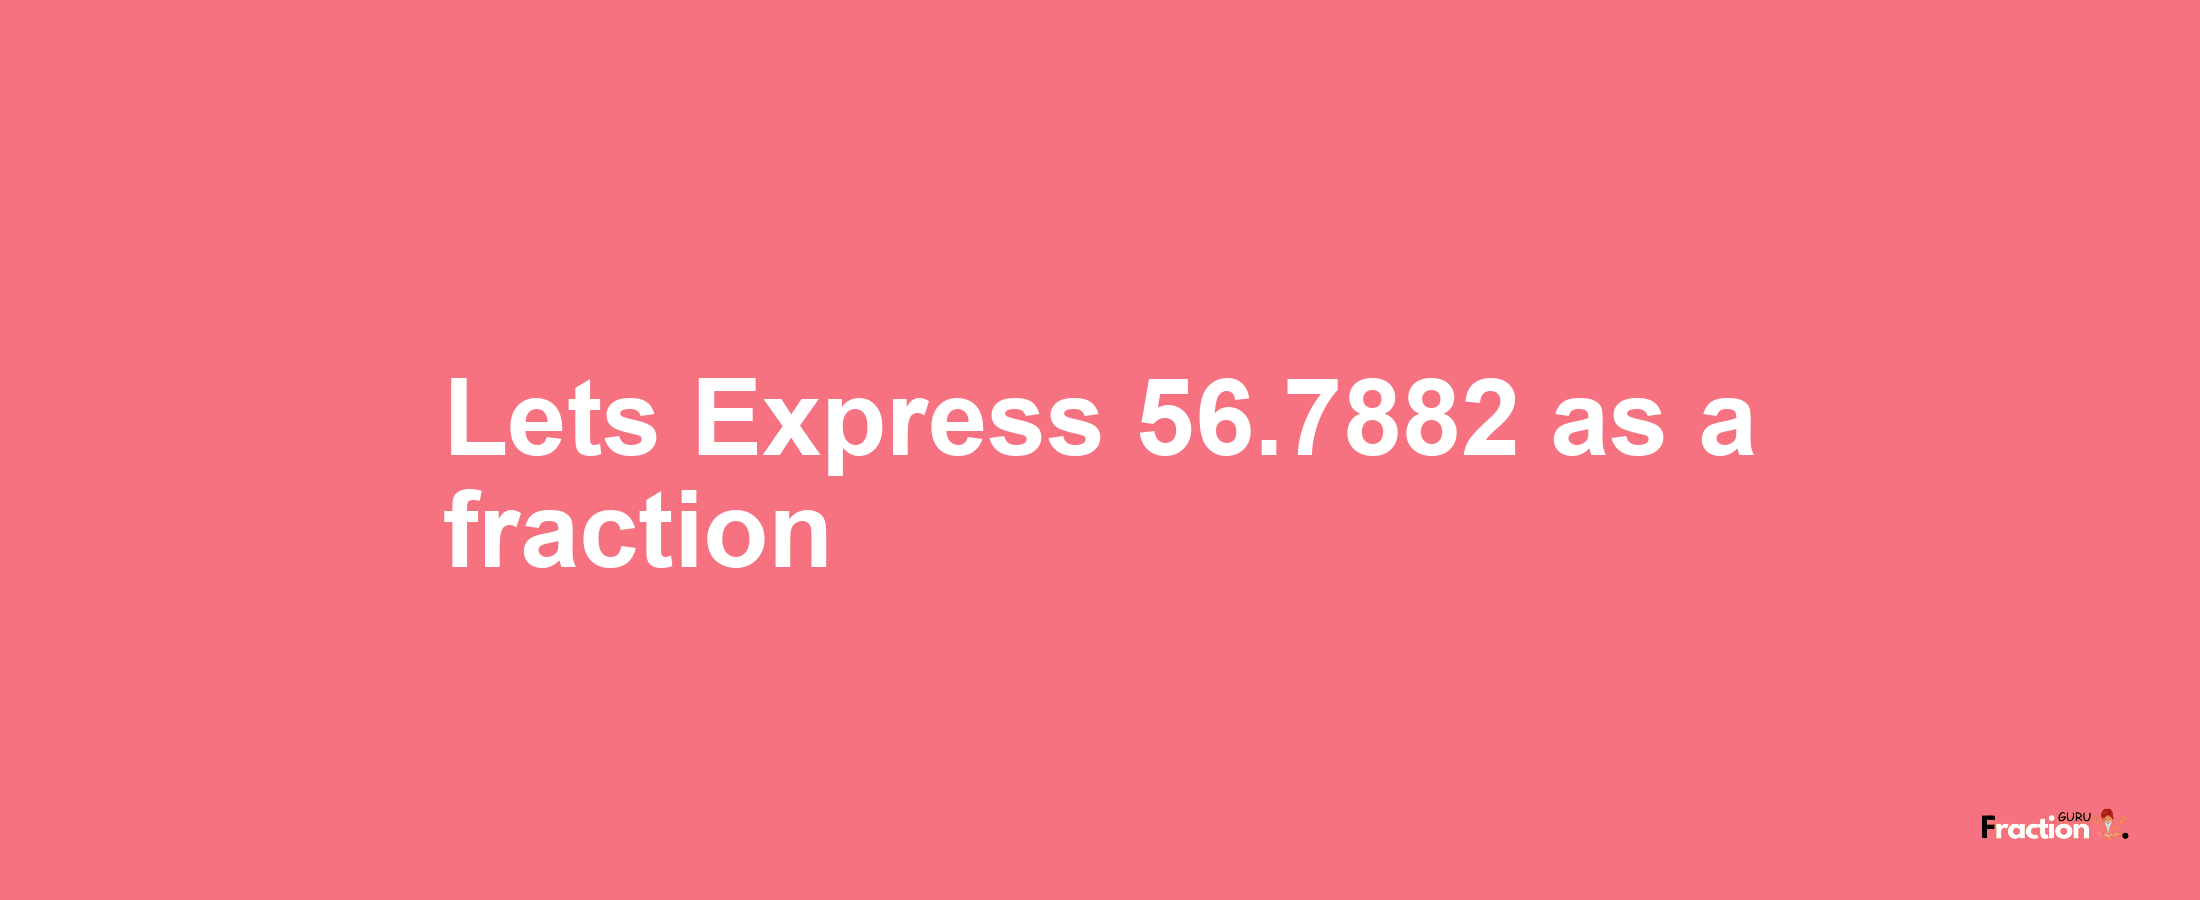 Lets Express 56.7882 as afraction